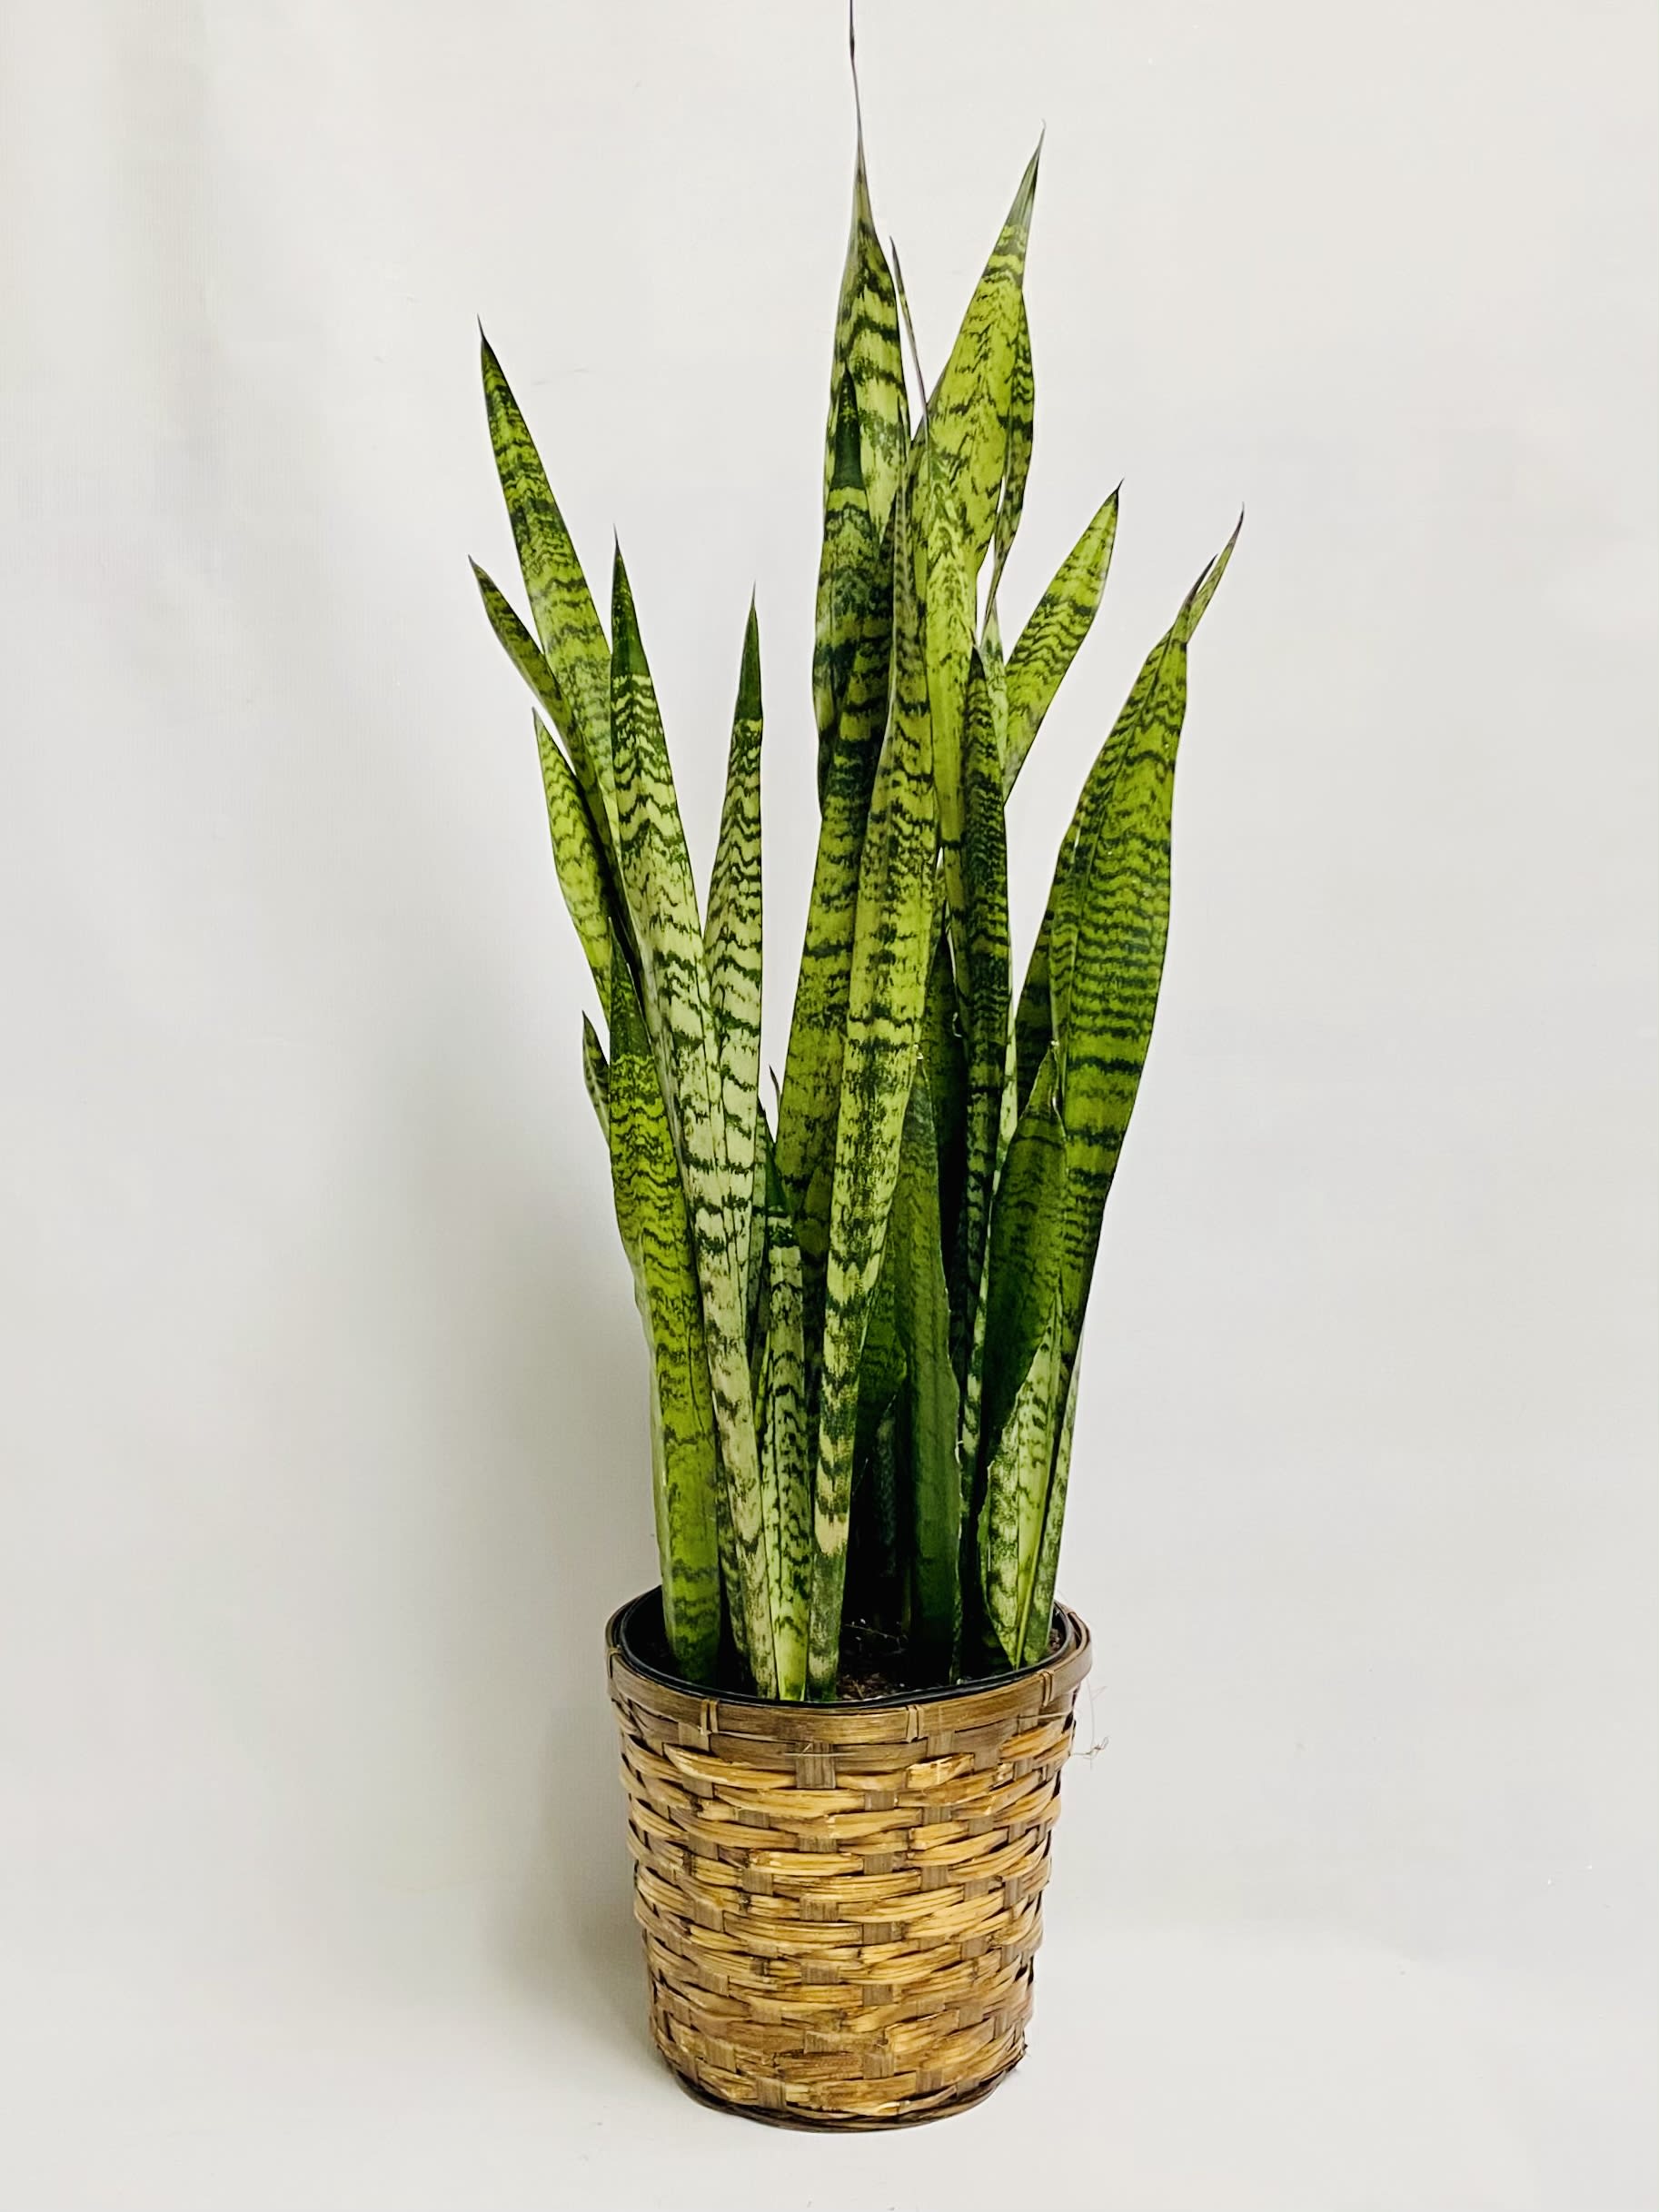 Snake plant (Mother-in-law's tongue) - 8 inch floor plan easy to take care of only needs water twice a month will work in direct sun to no sun 